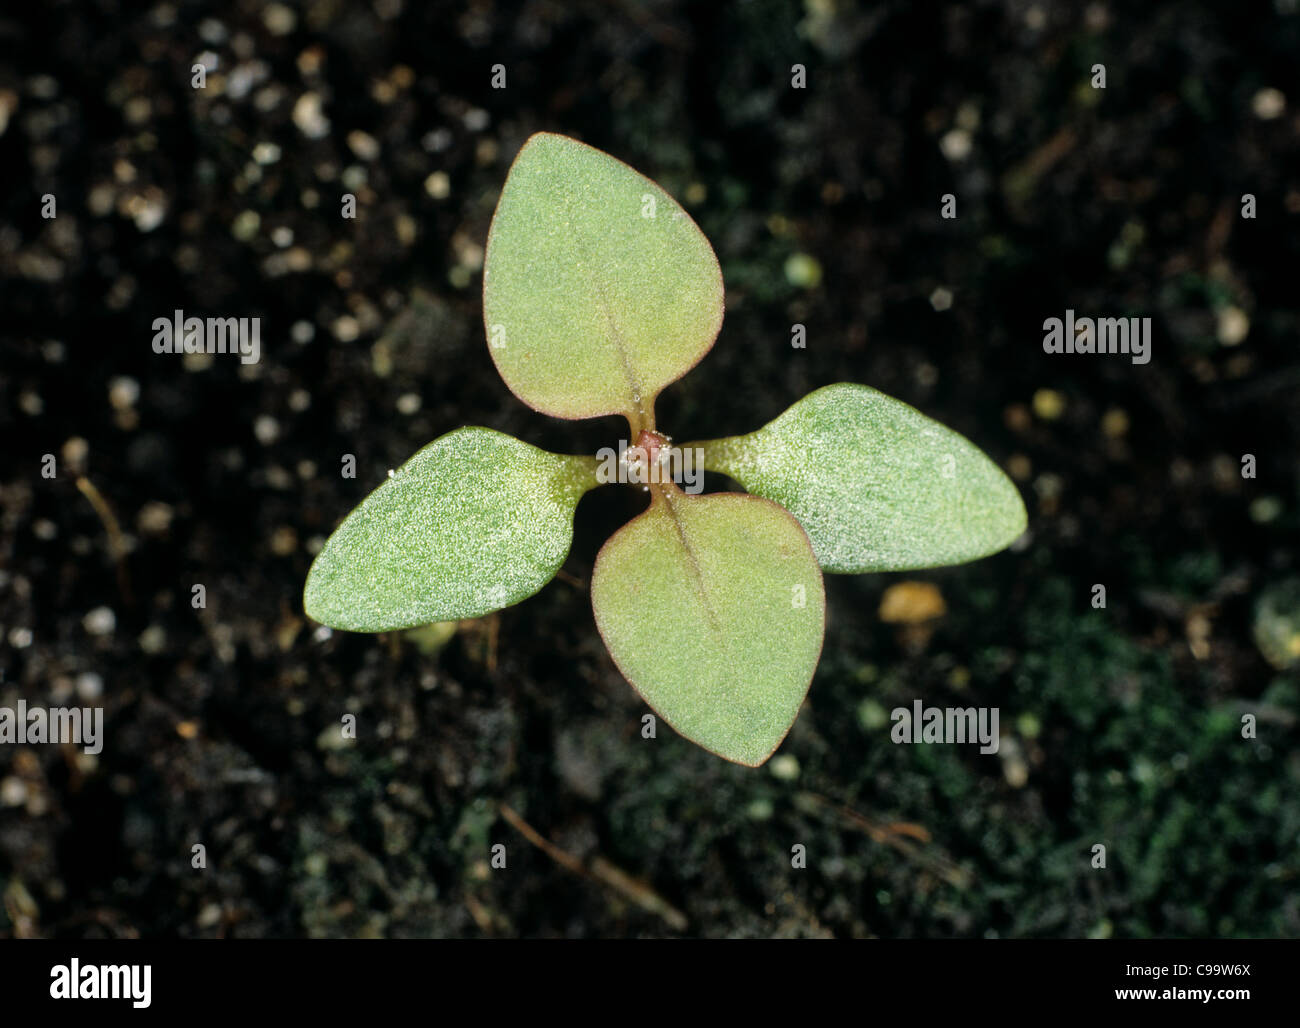 Many-seeded goosefoot (Chenopodium polyspermum) seedling with cotyledons & two true leaves forming Stock Photo